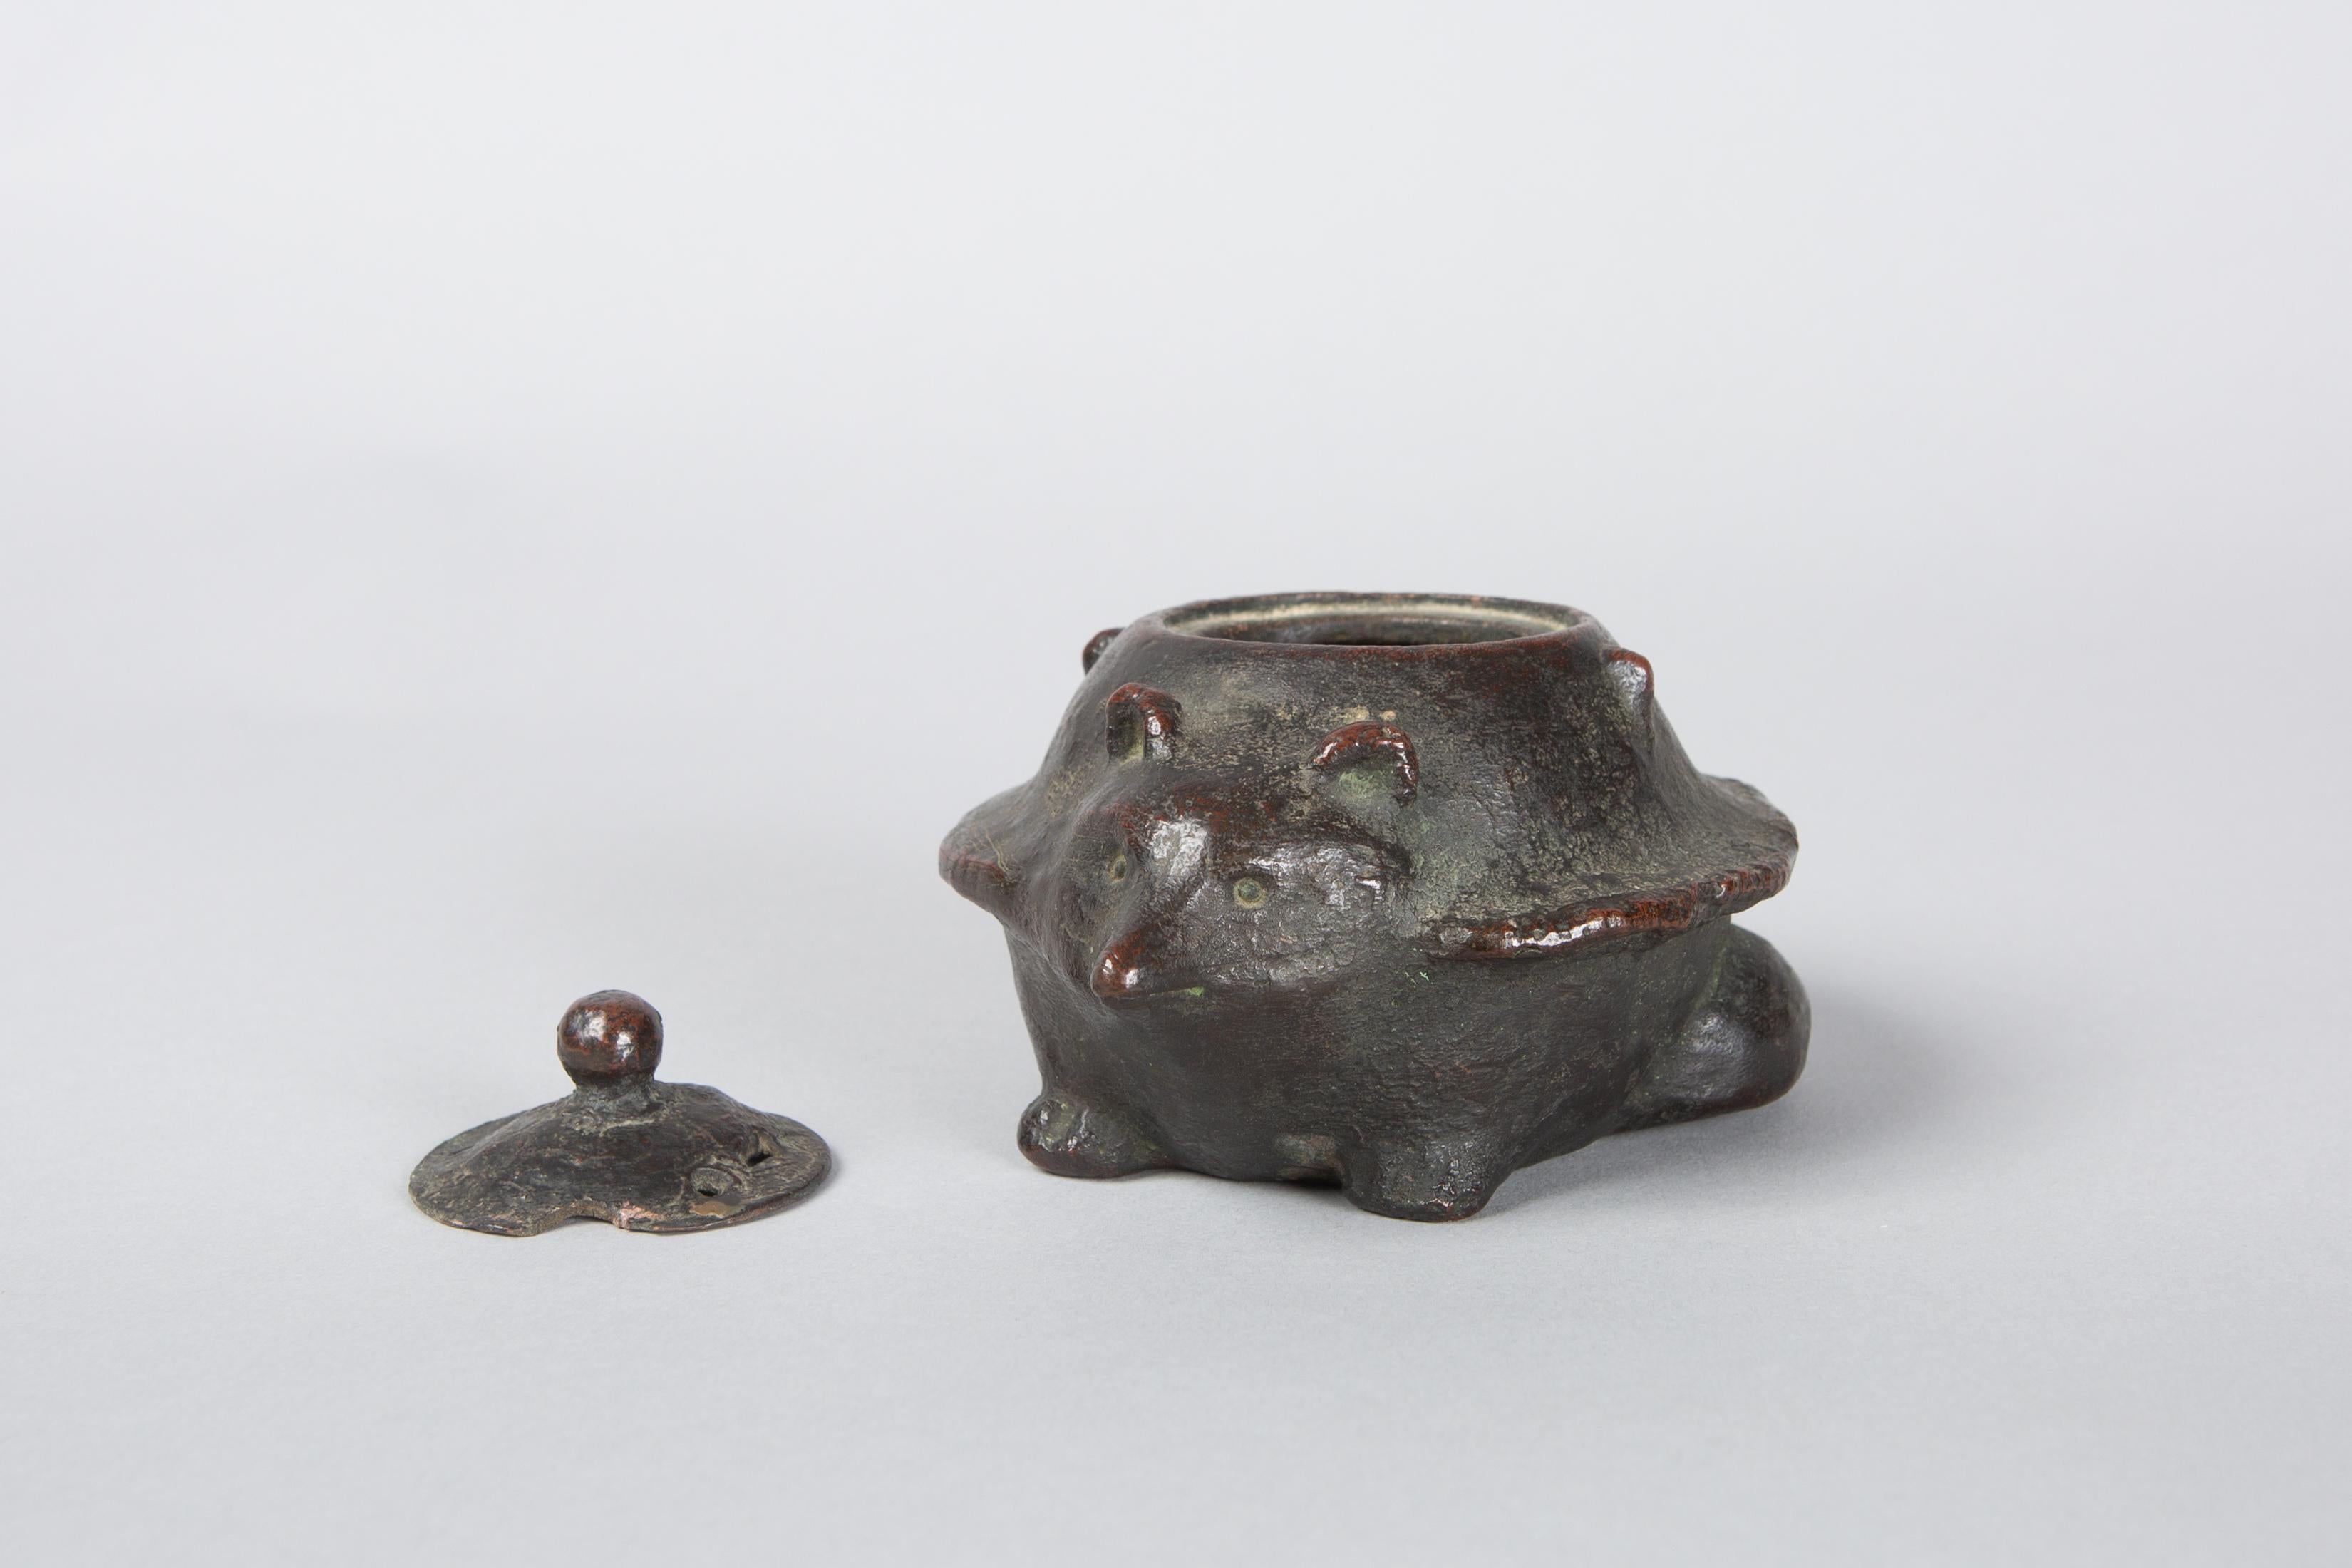 Japanese bronze Koro (Incense Burner) in the form of a Badger, Edo Period (circa 1800) bronze incense burner with removable top. Badger face and tail details, and wonderful patina from many years of use.